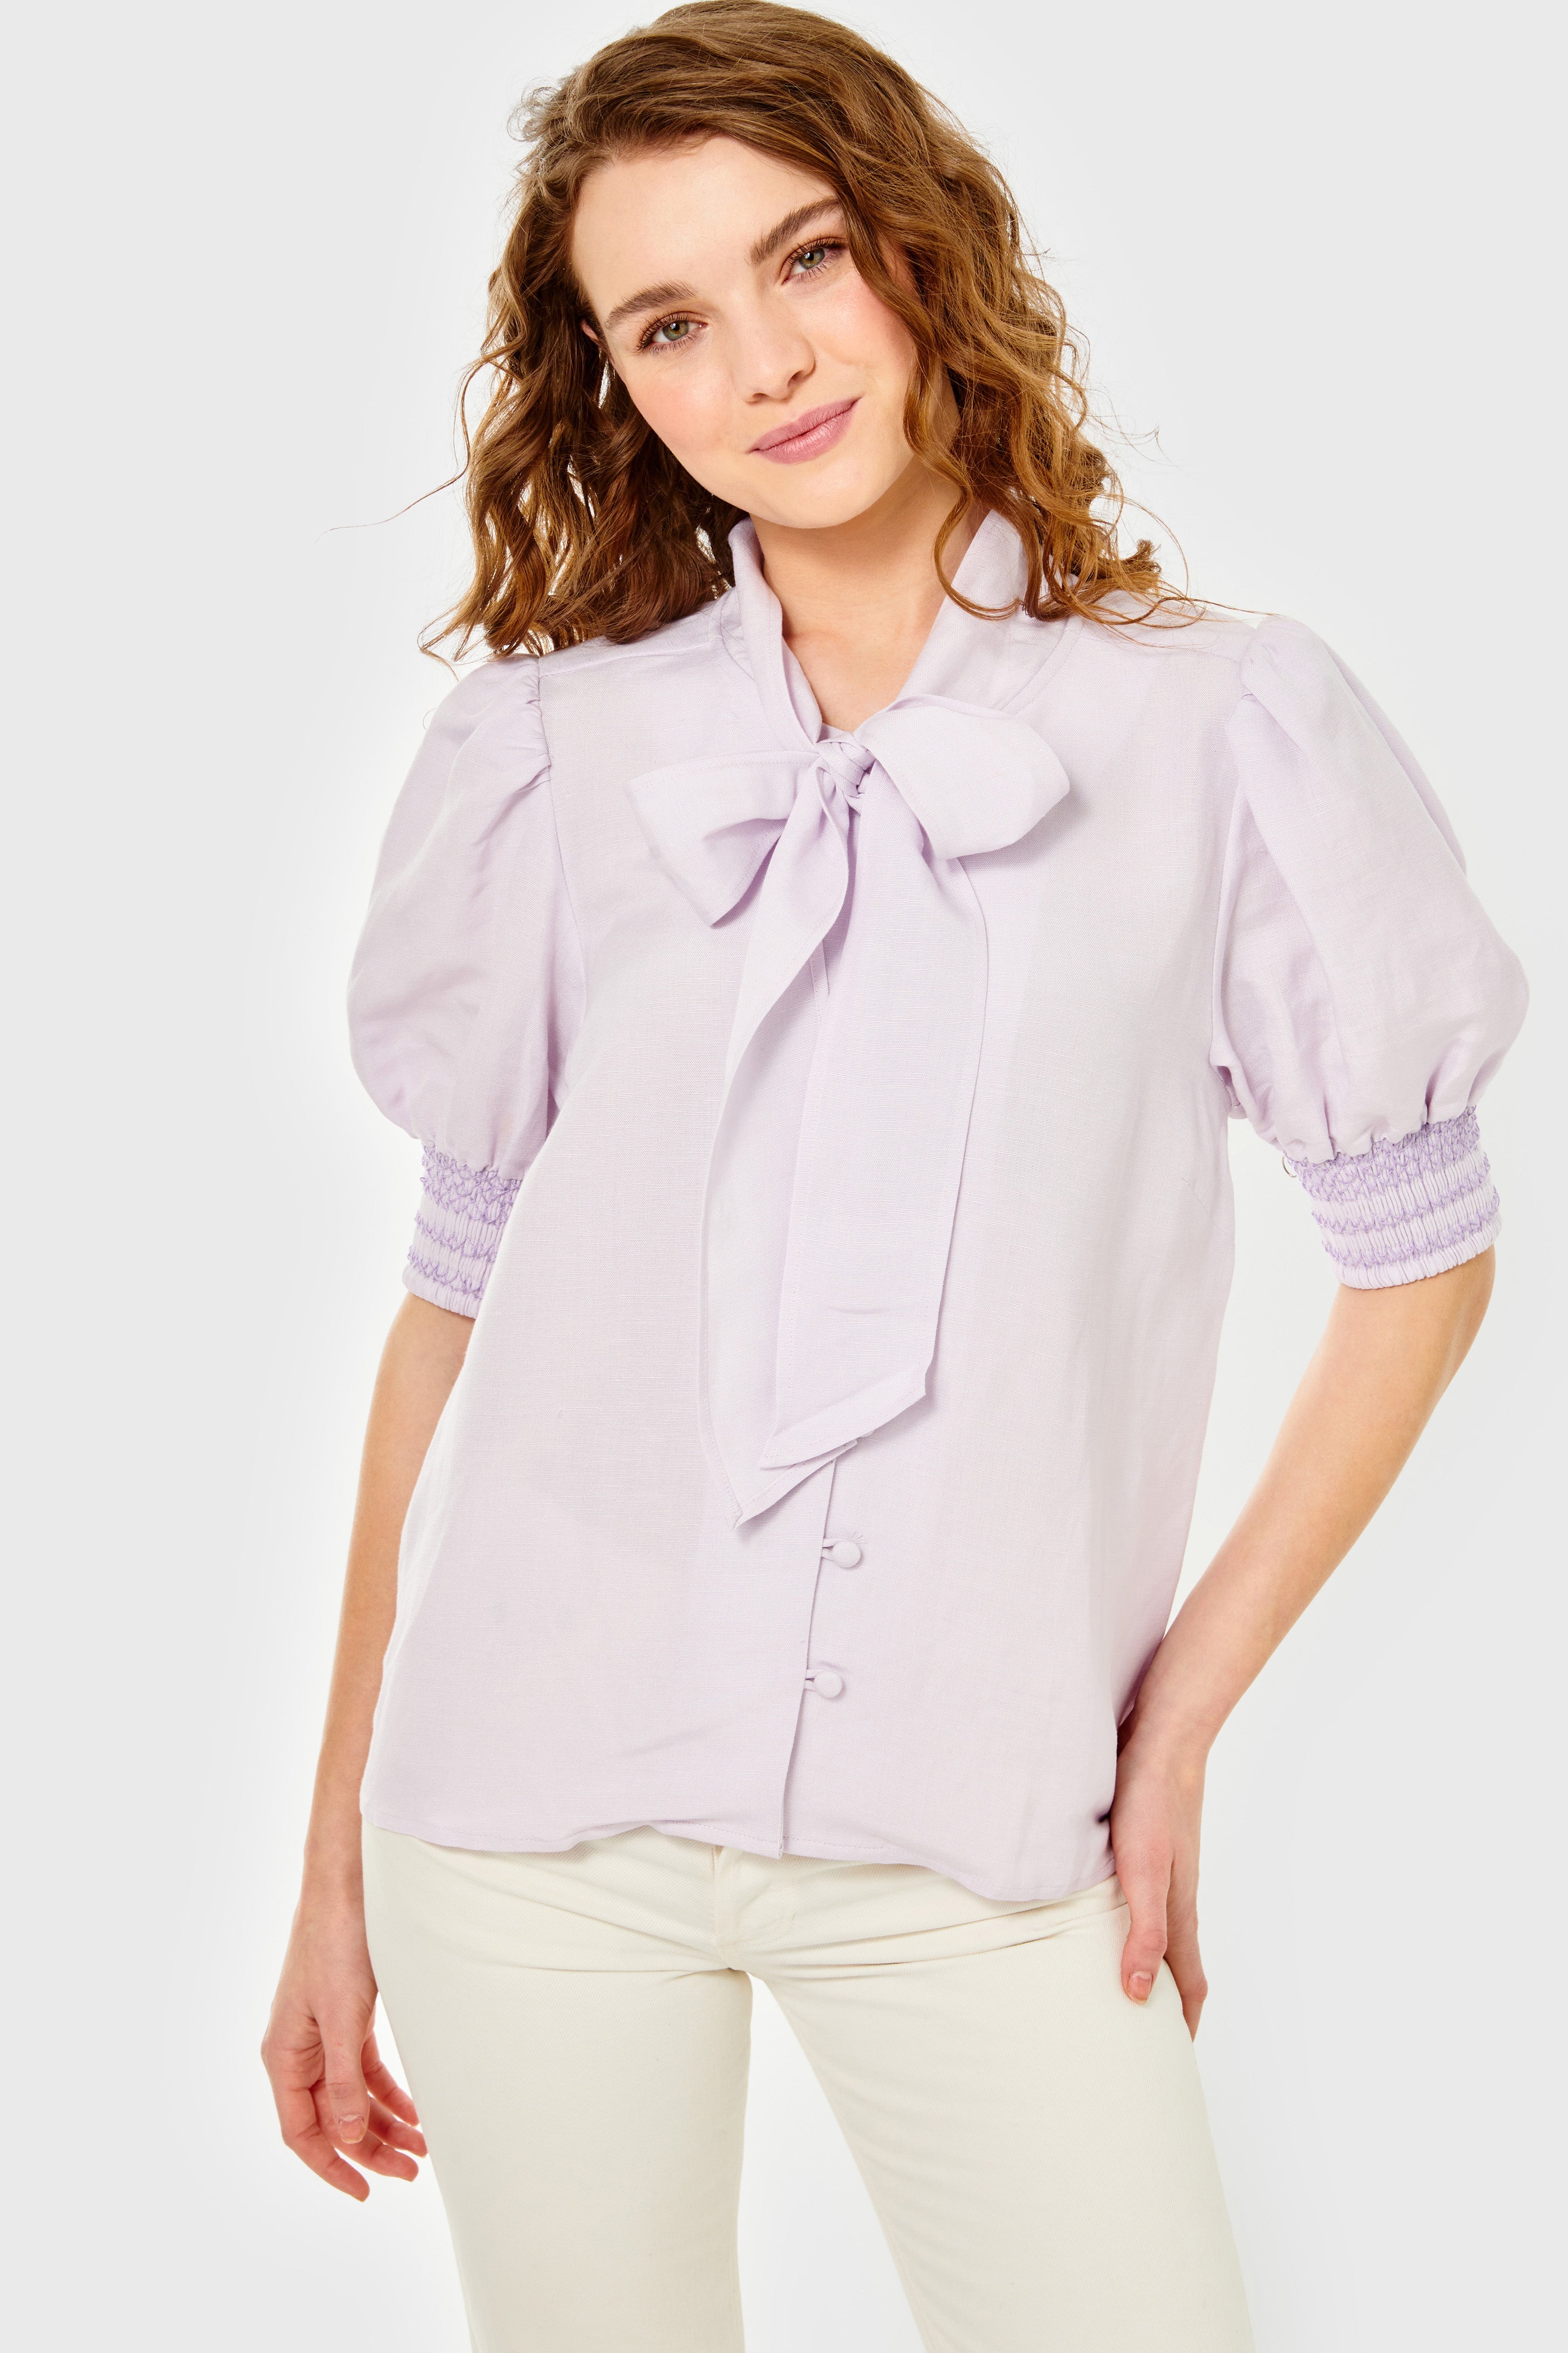 Peggy Top-Linen-Orchid Hush by Cartolina Nantucket